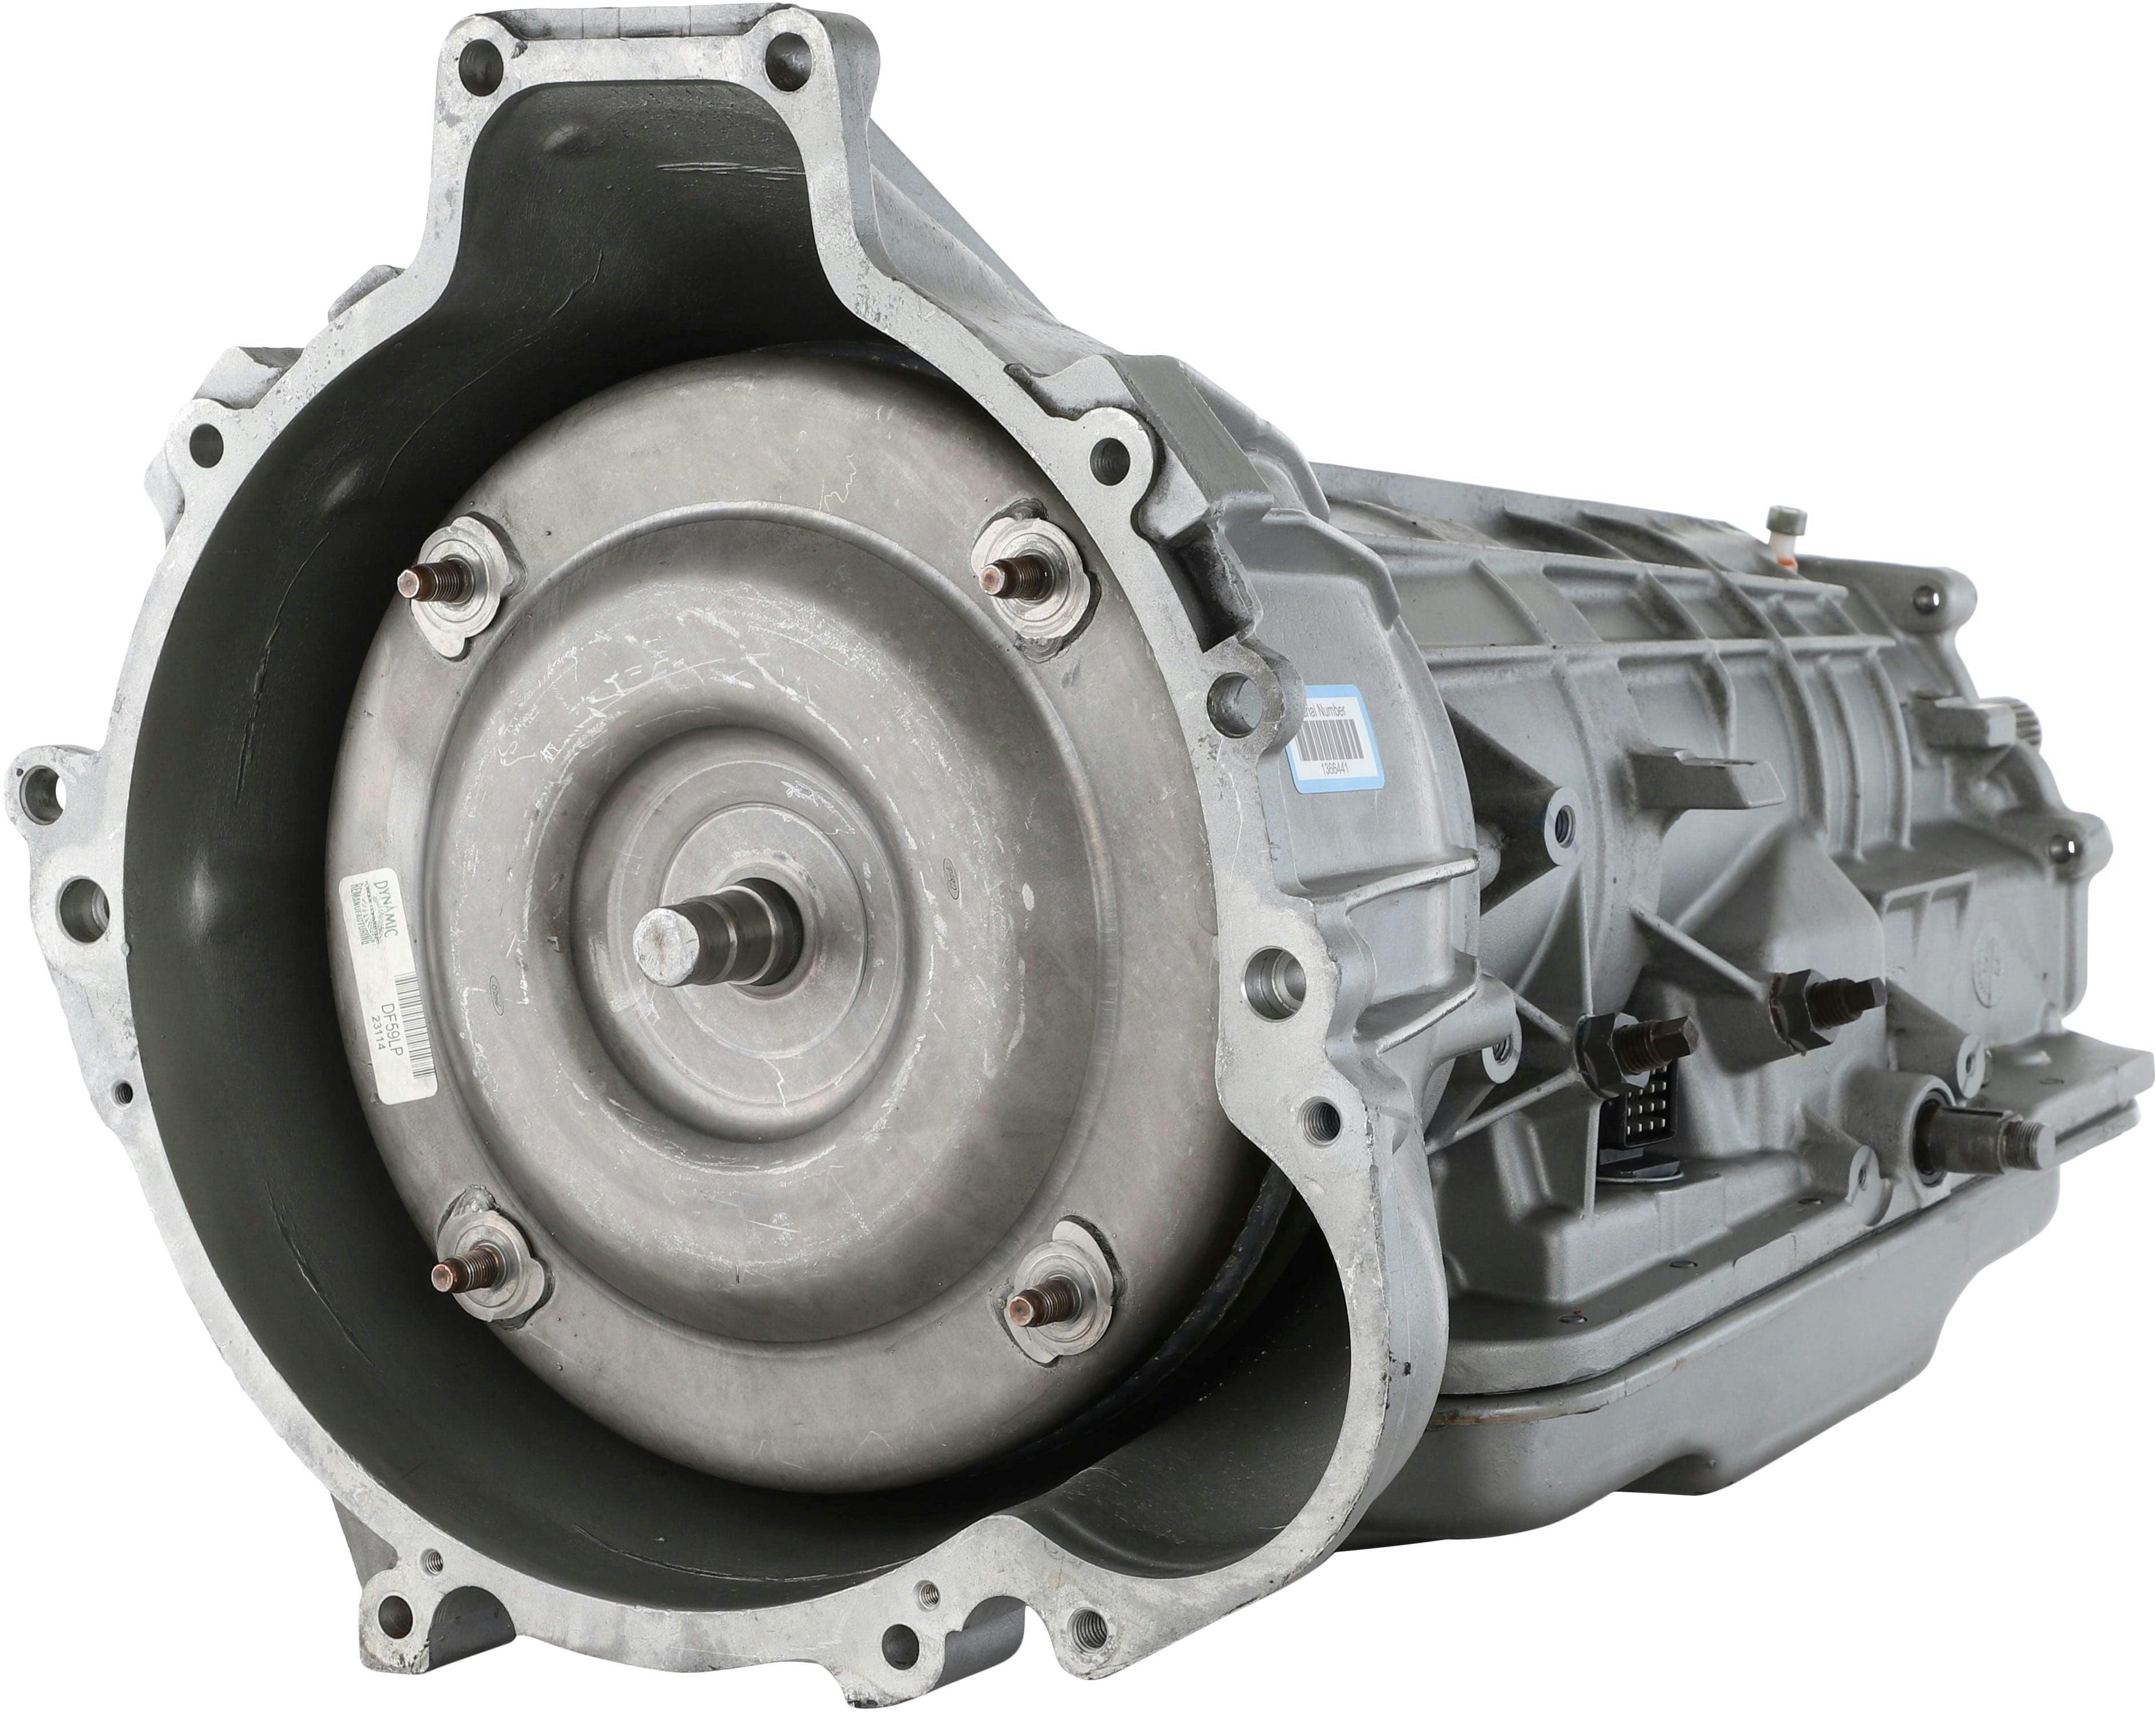 Automatic Transmission for 1995-1996 Ford Aerostar/Explorer/Ranger and Mazda B4000 4WD with 4L V6 Engine